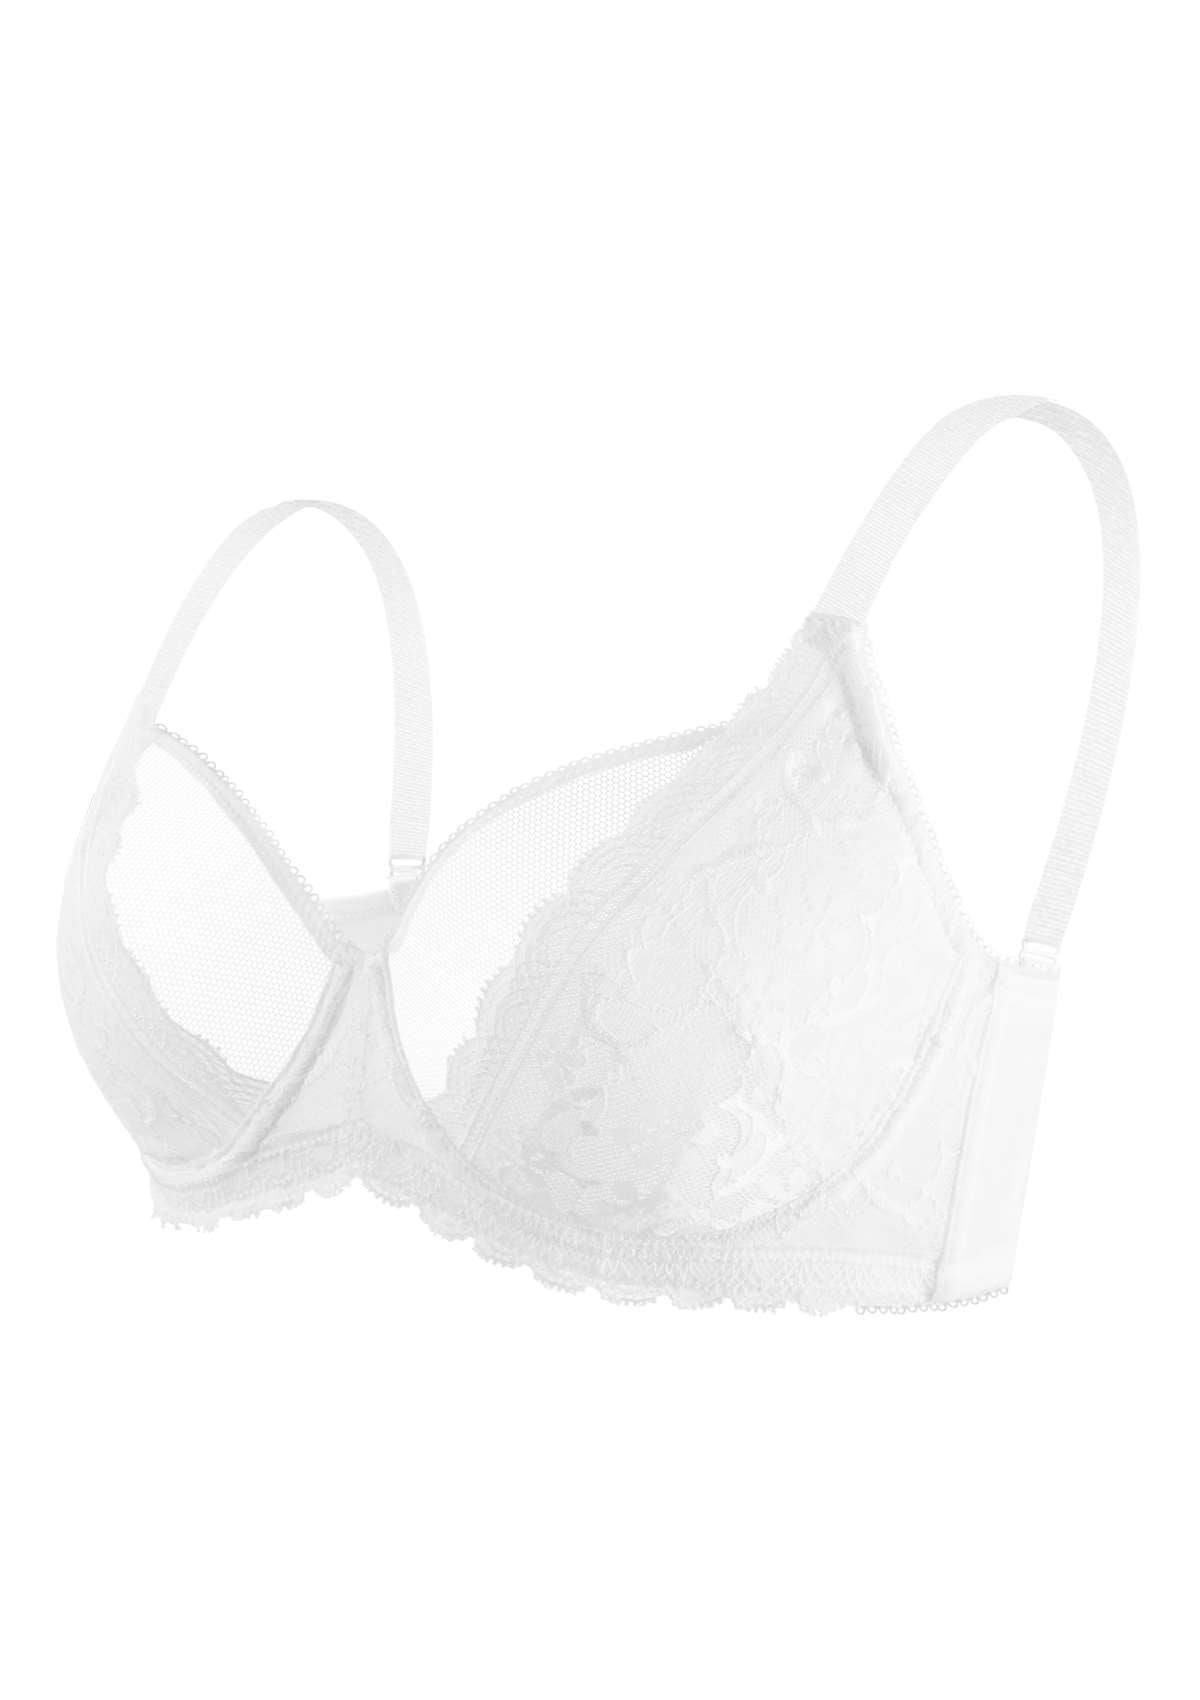 HSIA Anemone Big Bra: Best Bra For Lift And Support, Floral Bra - Black / 36 / D